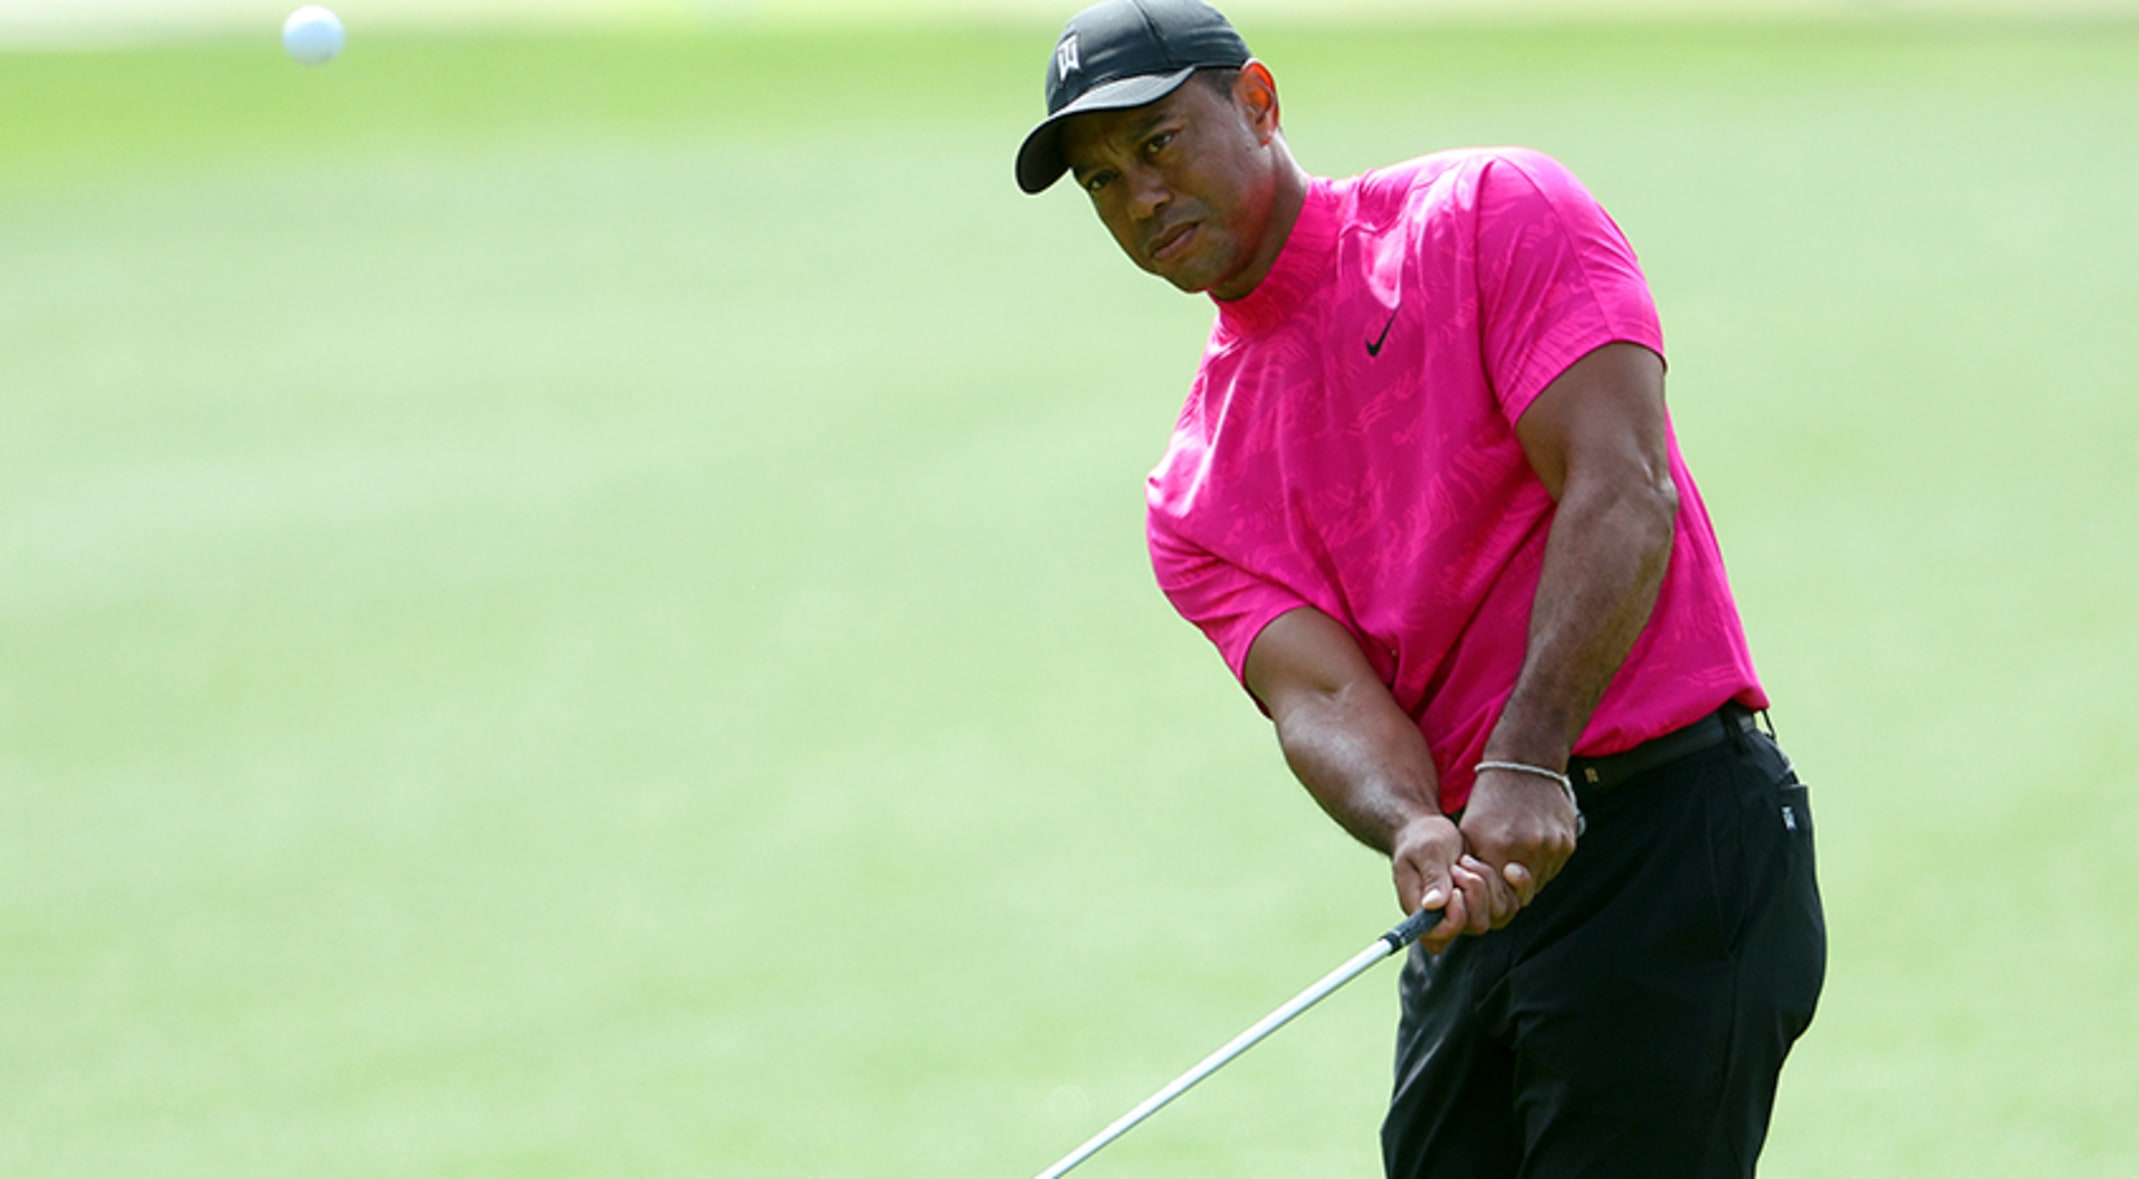 Updates on Tiger Woods from Thursday at the Masters